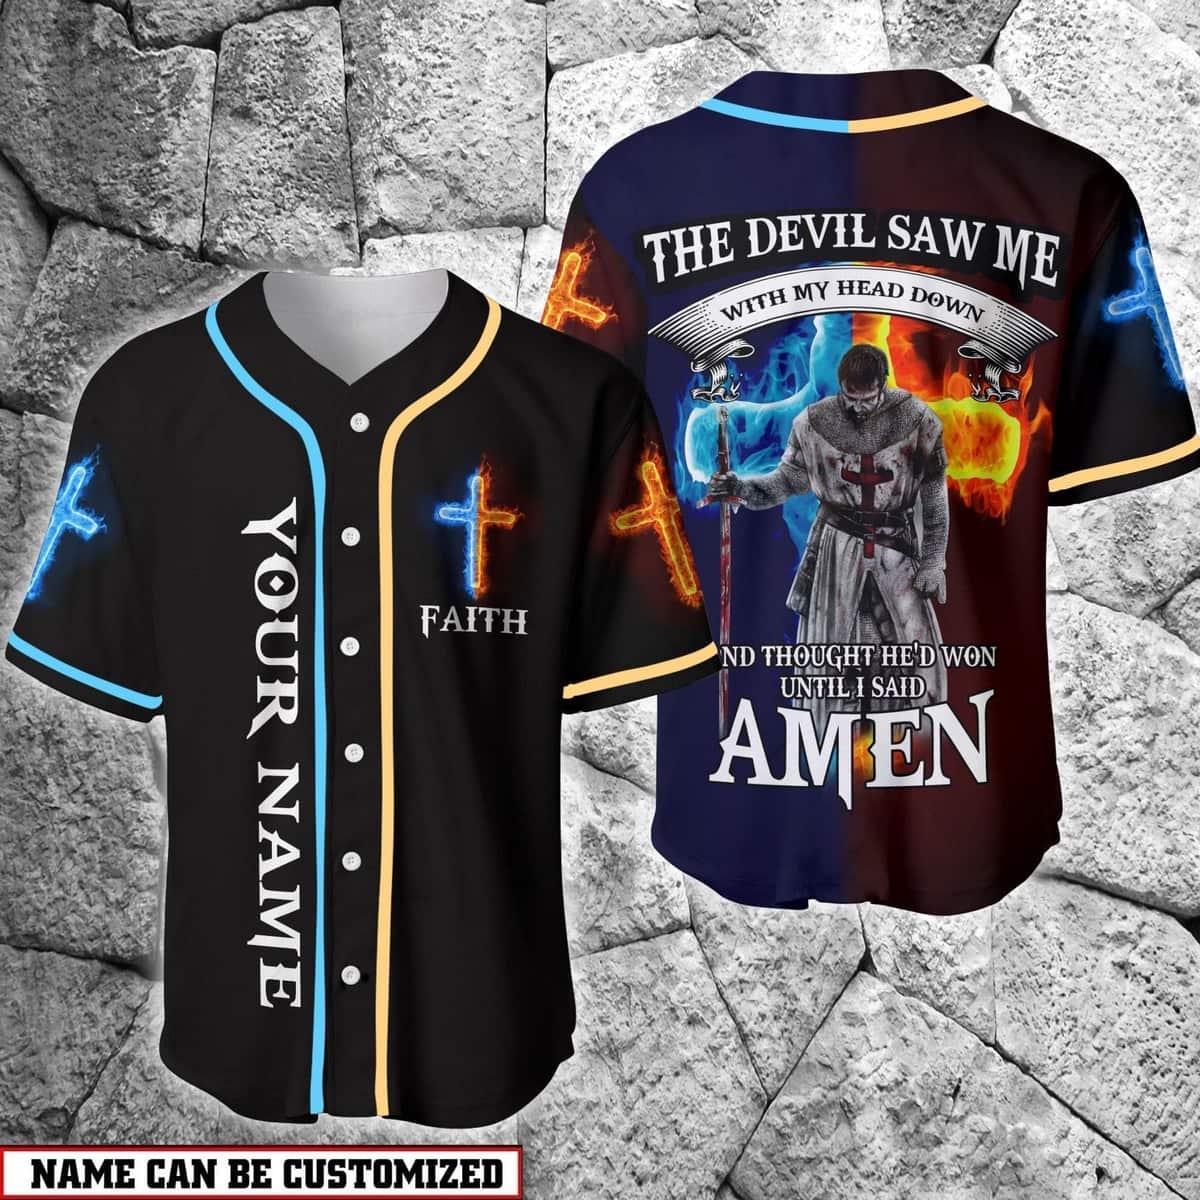 Customize Personalized Cross Flame Knight The Devil Saw Me With My Head Down Baseball Jersey